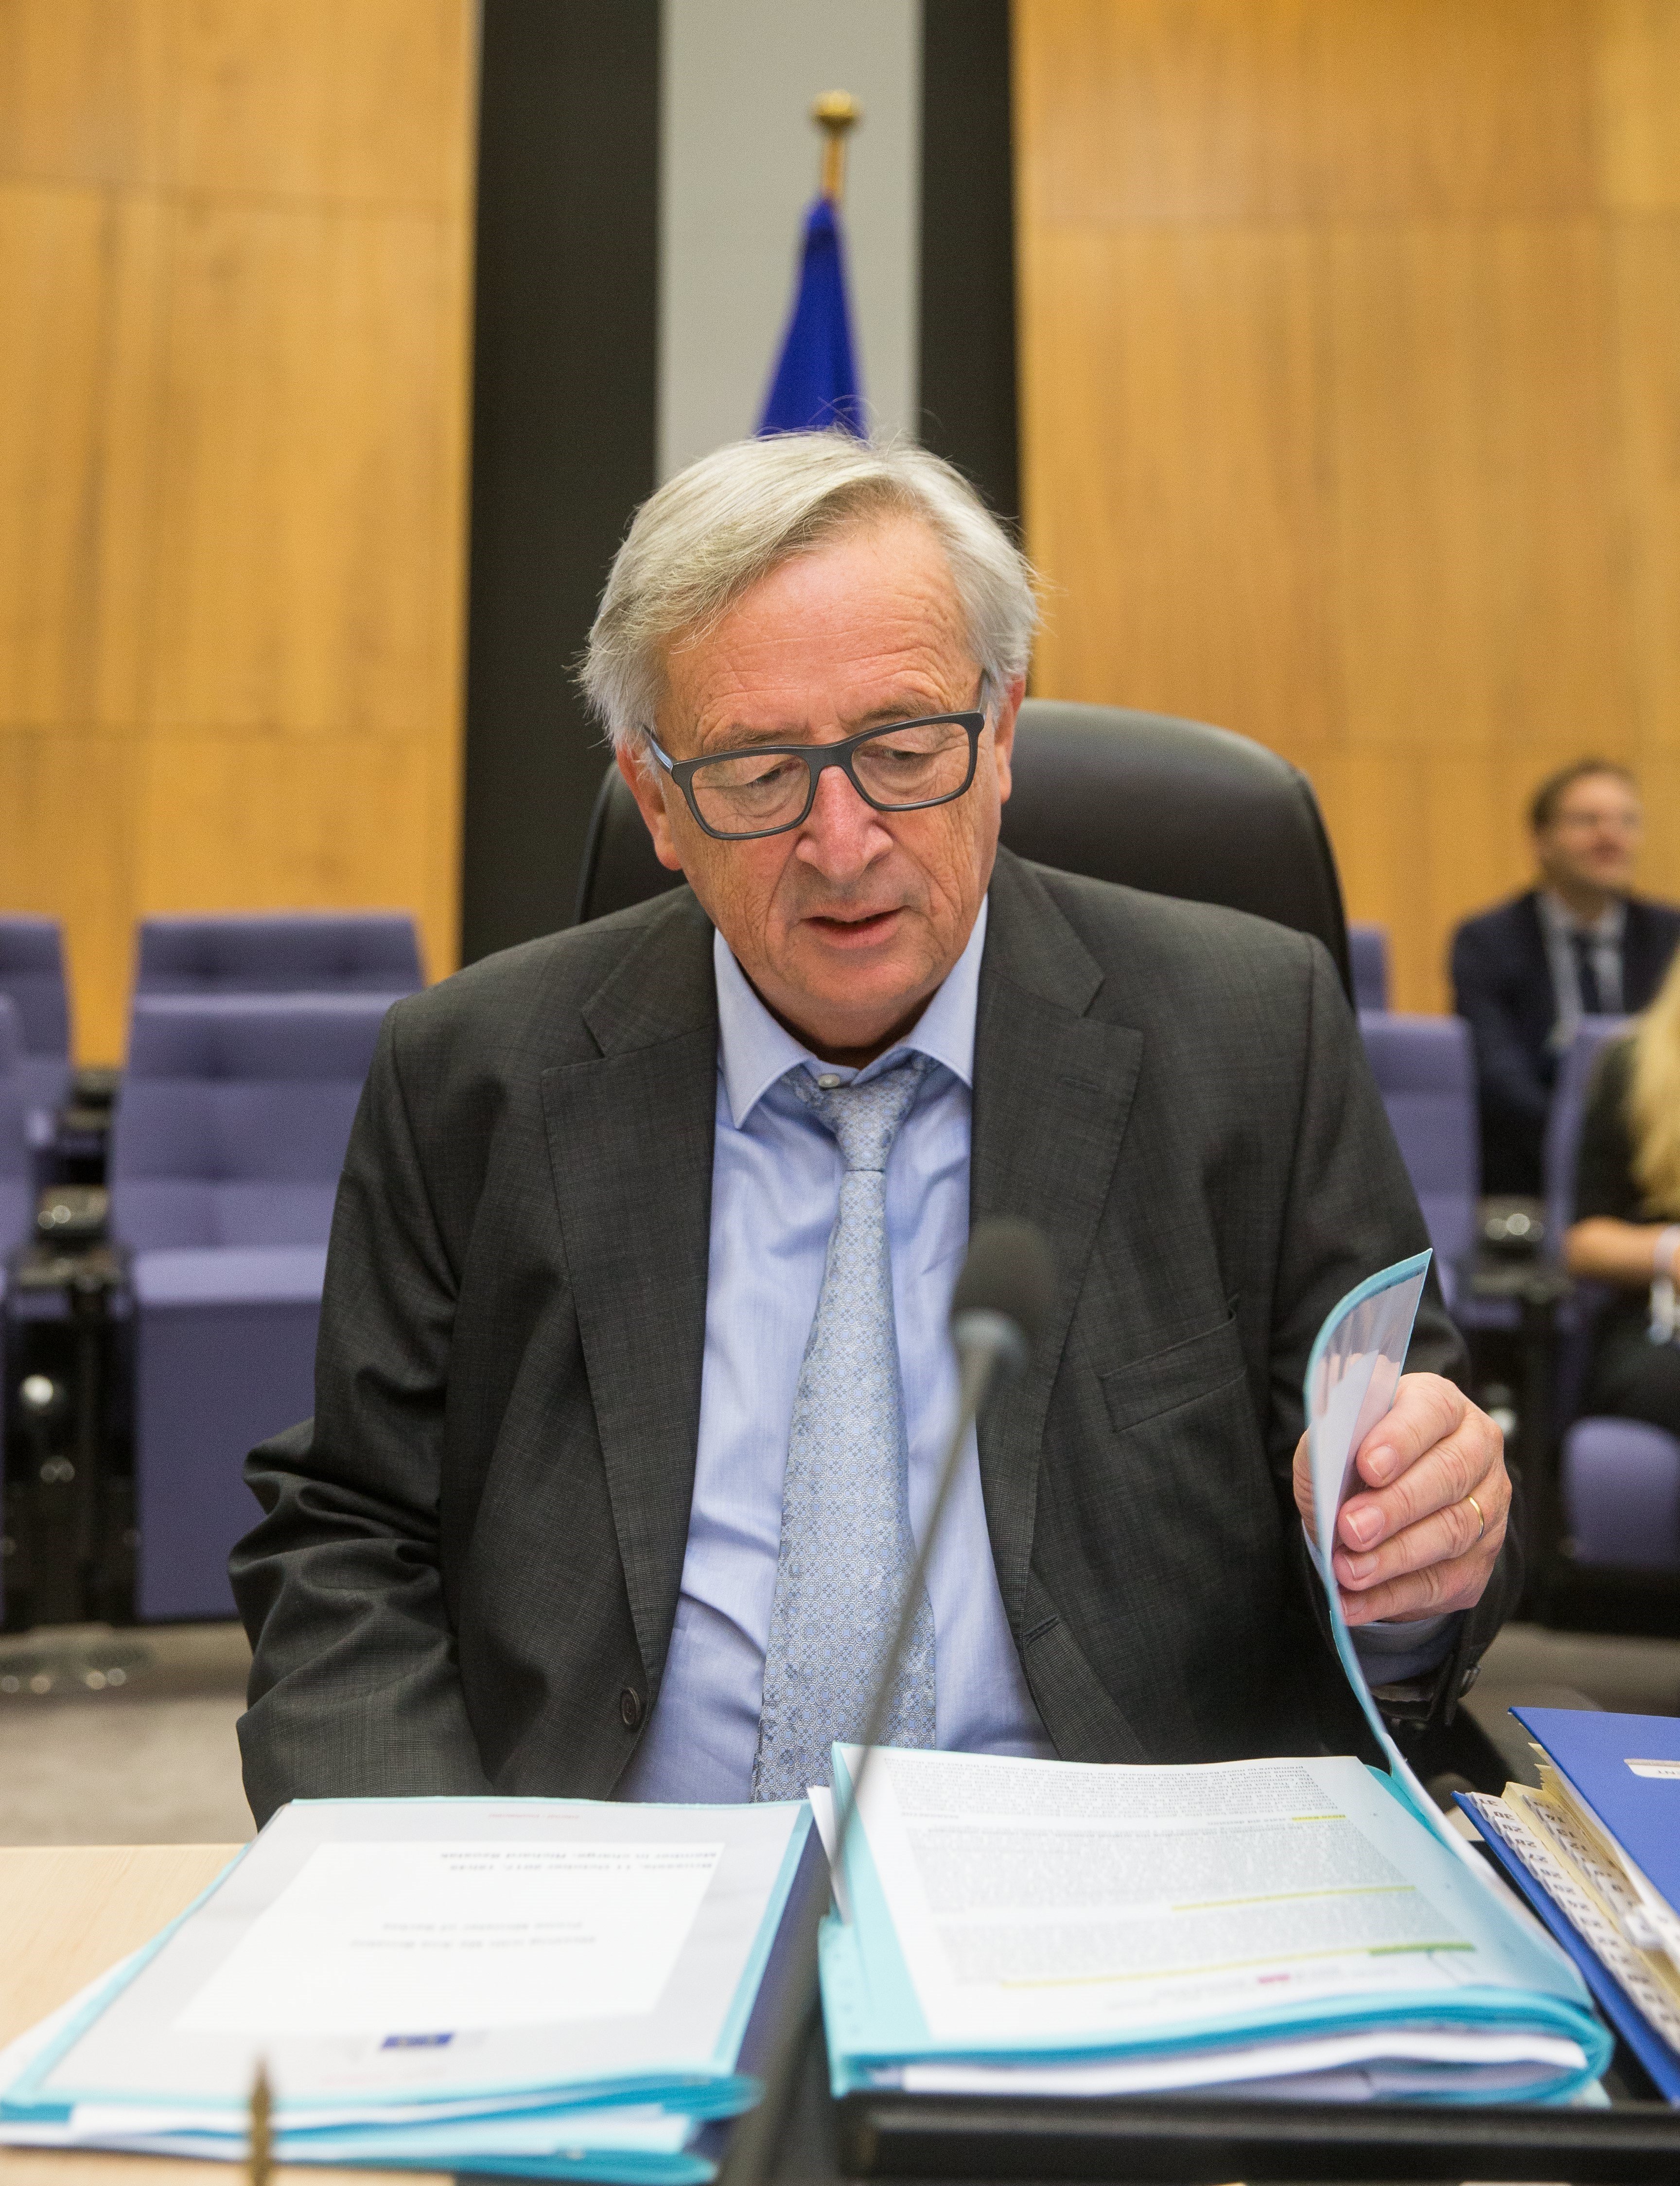 Juncker says he cannot mediate without a request from Spain too